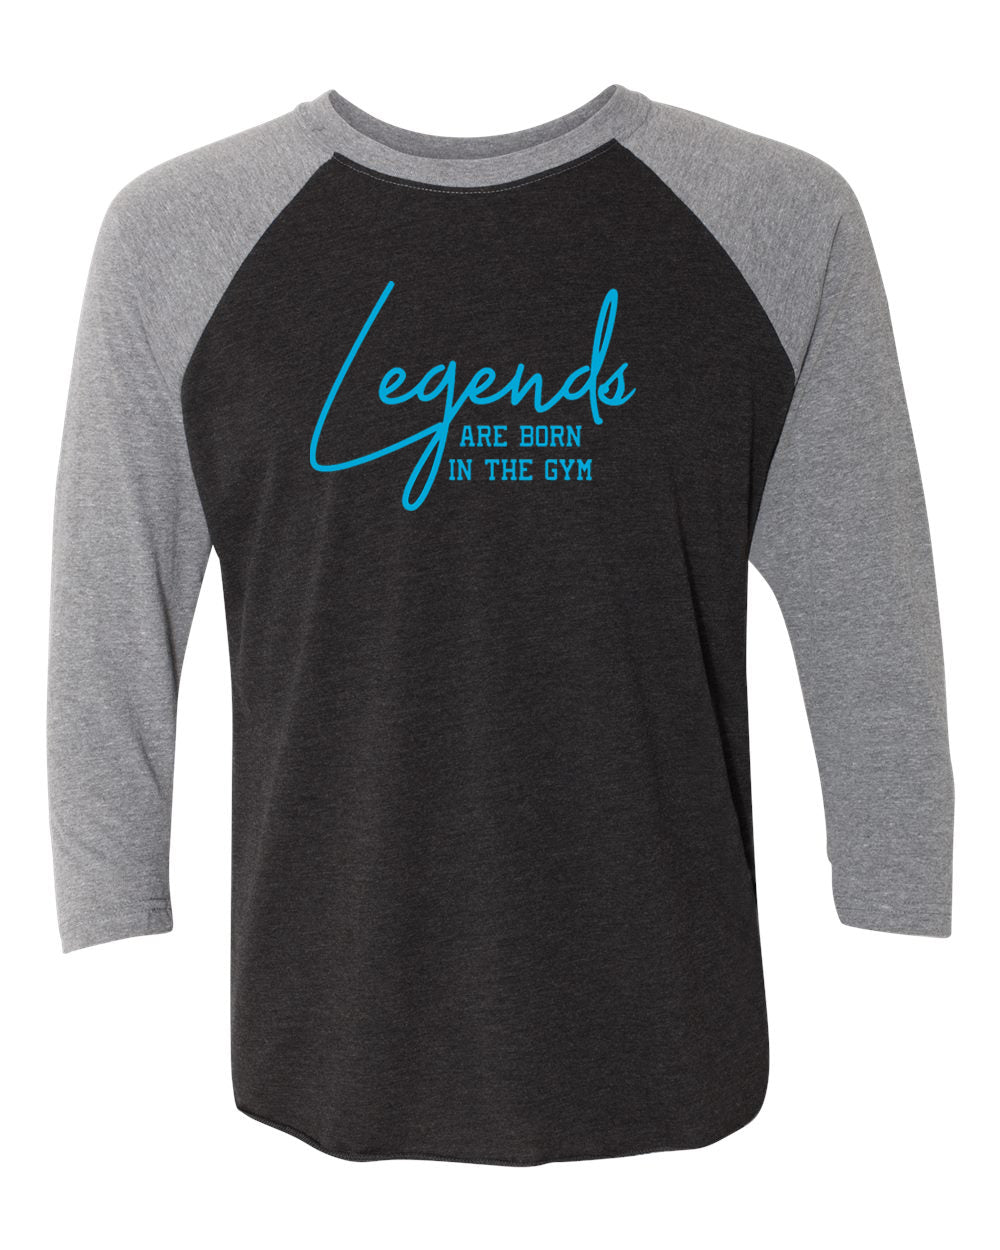 Legends Are Born In The Gym Adult 3/4 Sleeve Raglan T-Shirt